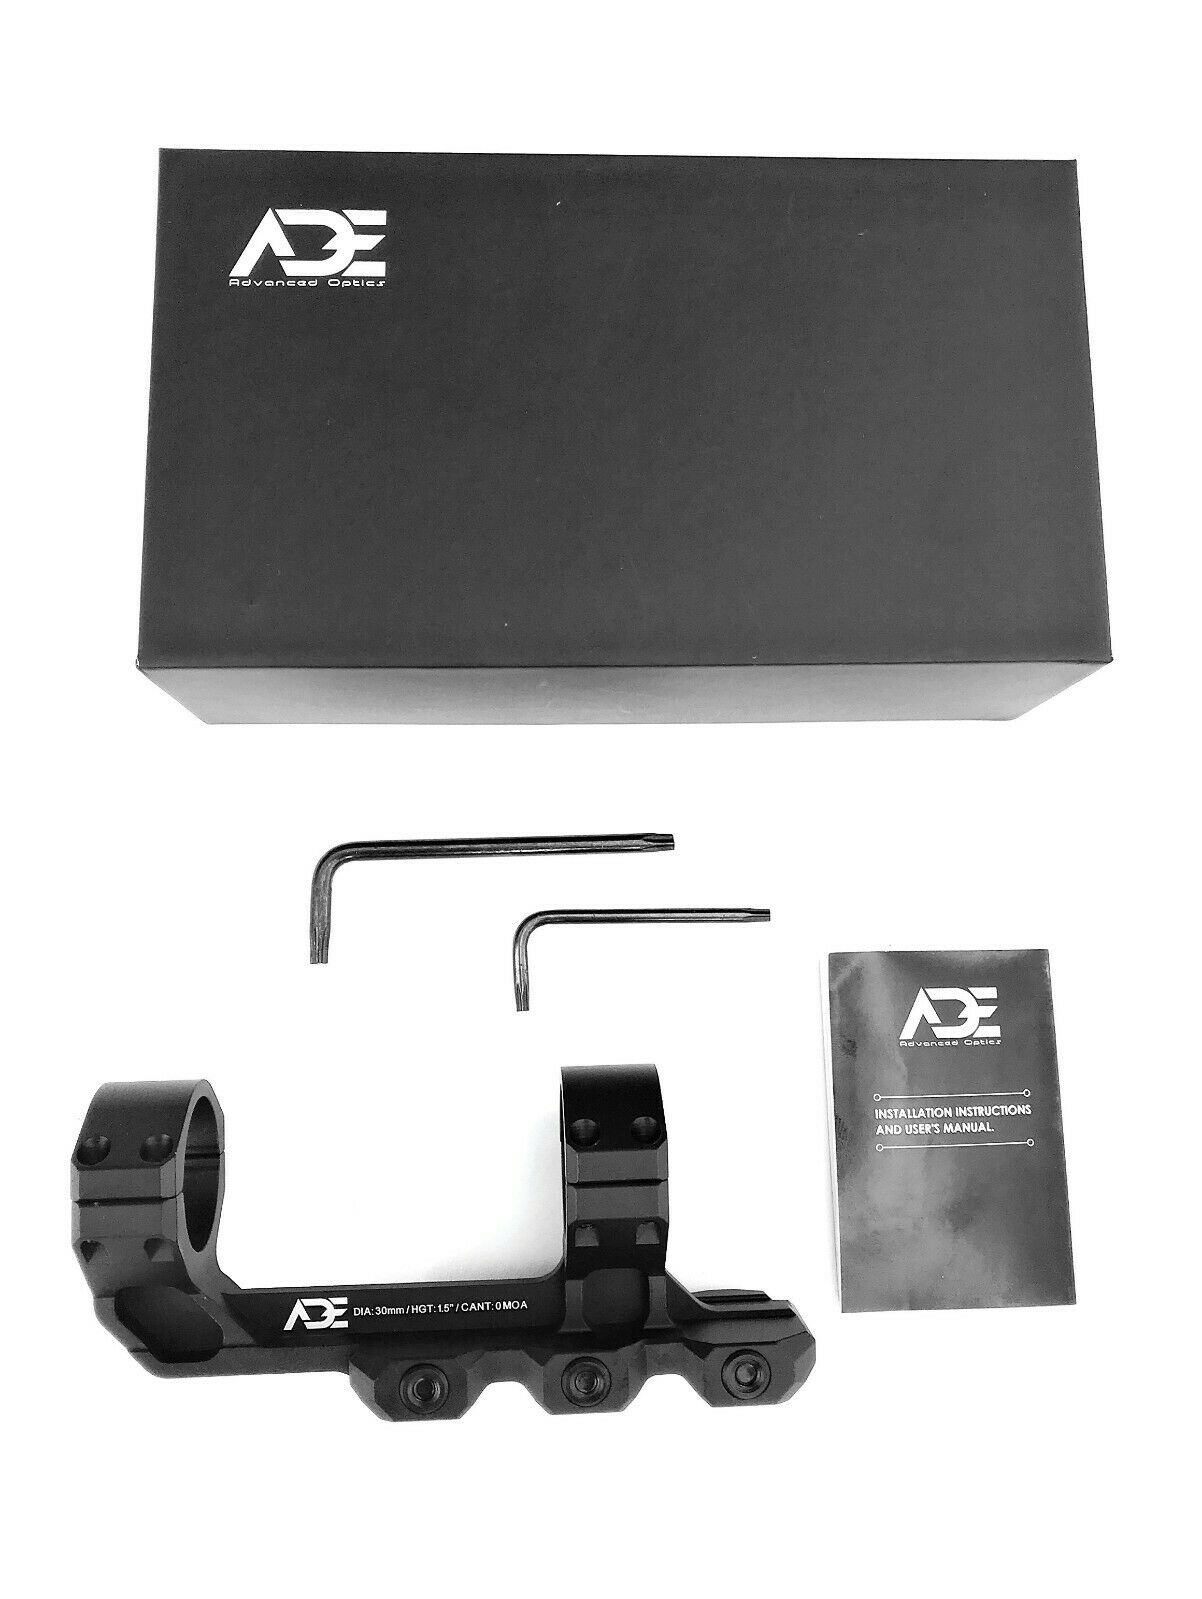 Ade Advanced Optics PS001C 30mm Flat Top Offset Cantilever One Piece Rifle Scope